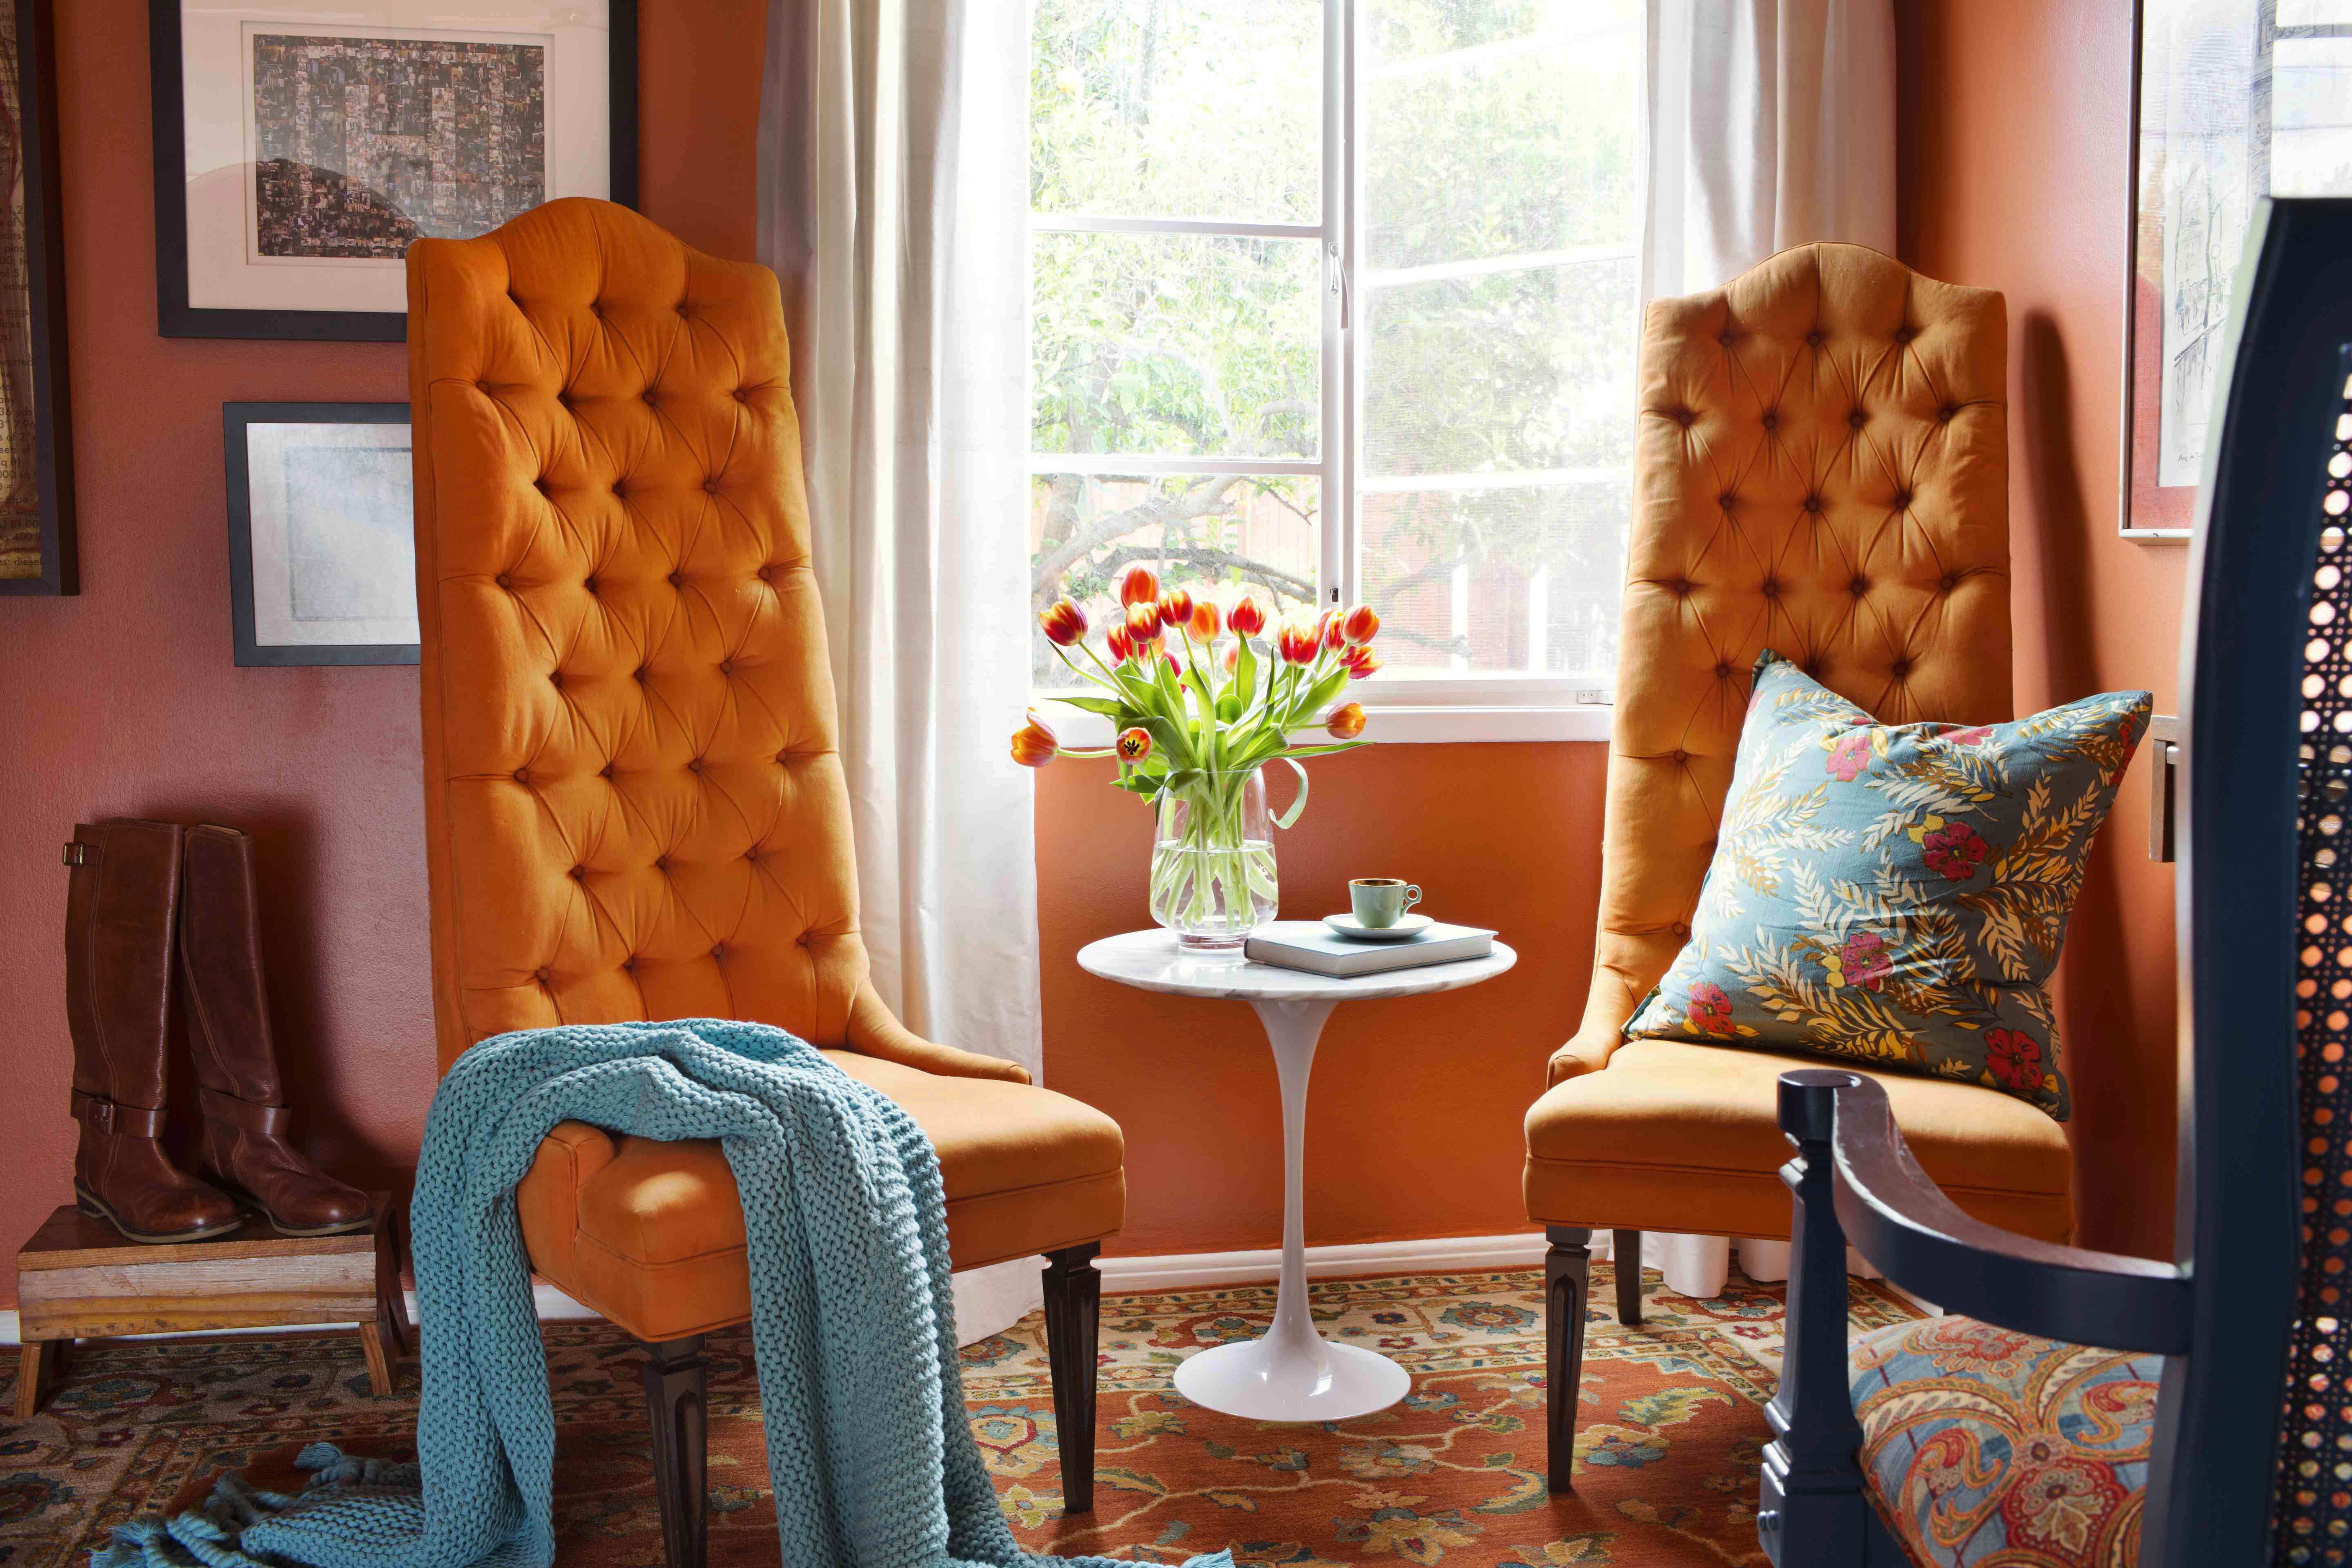 How To Decorate Your Home With Orange (Photos)